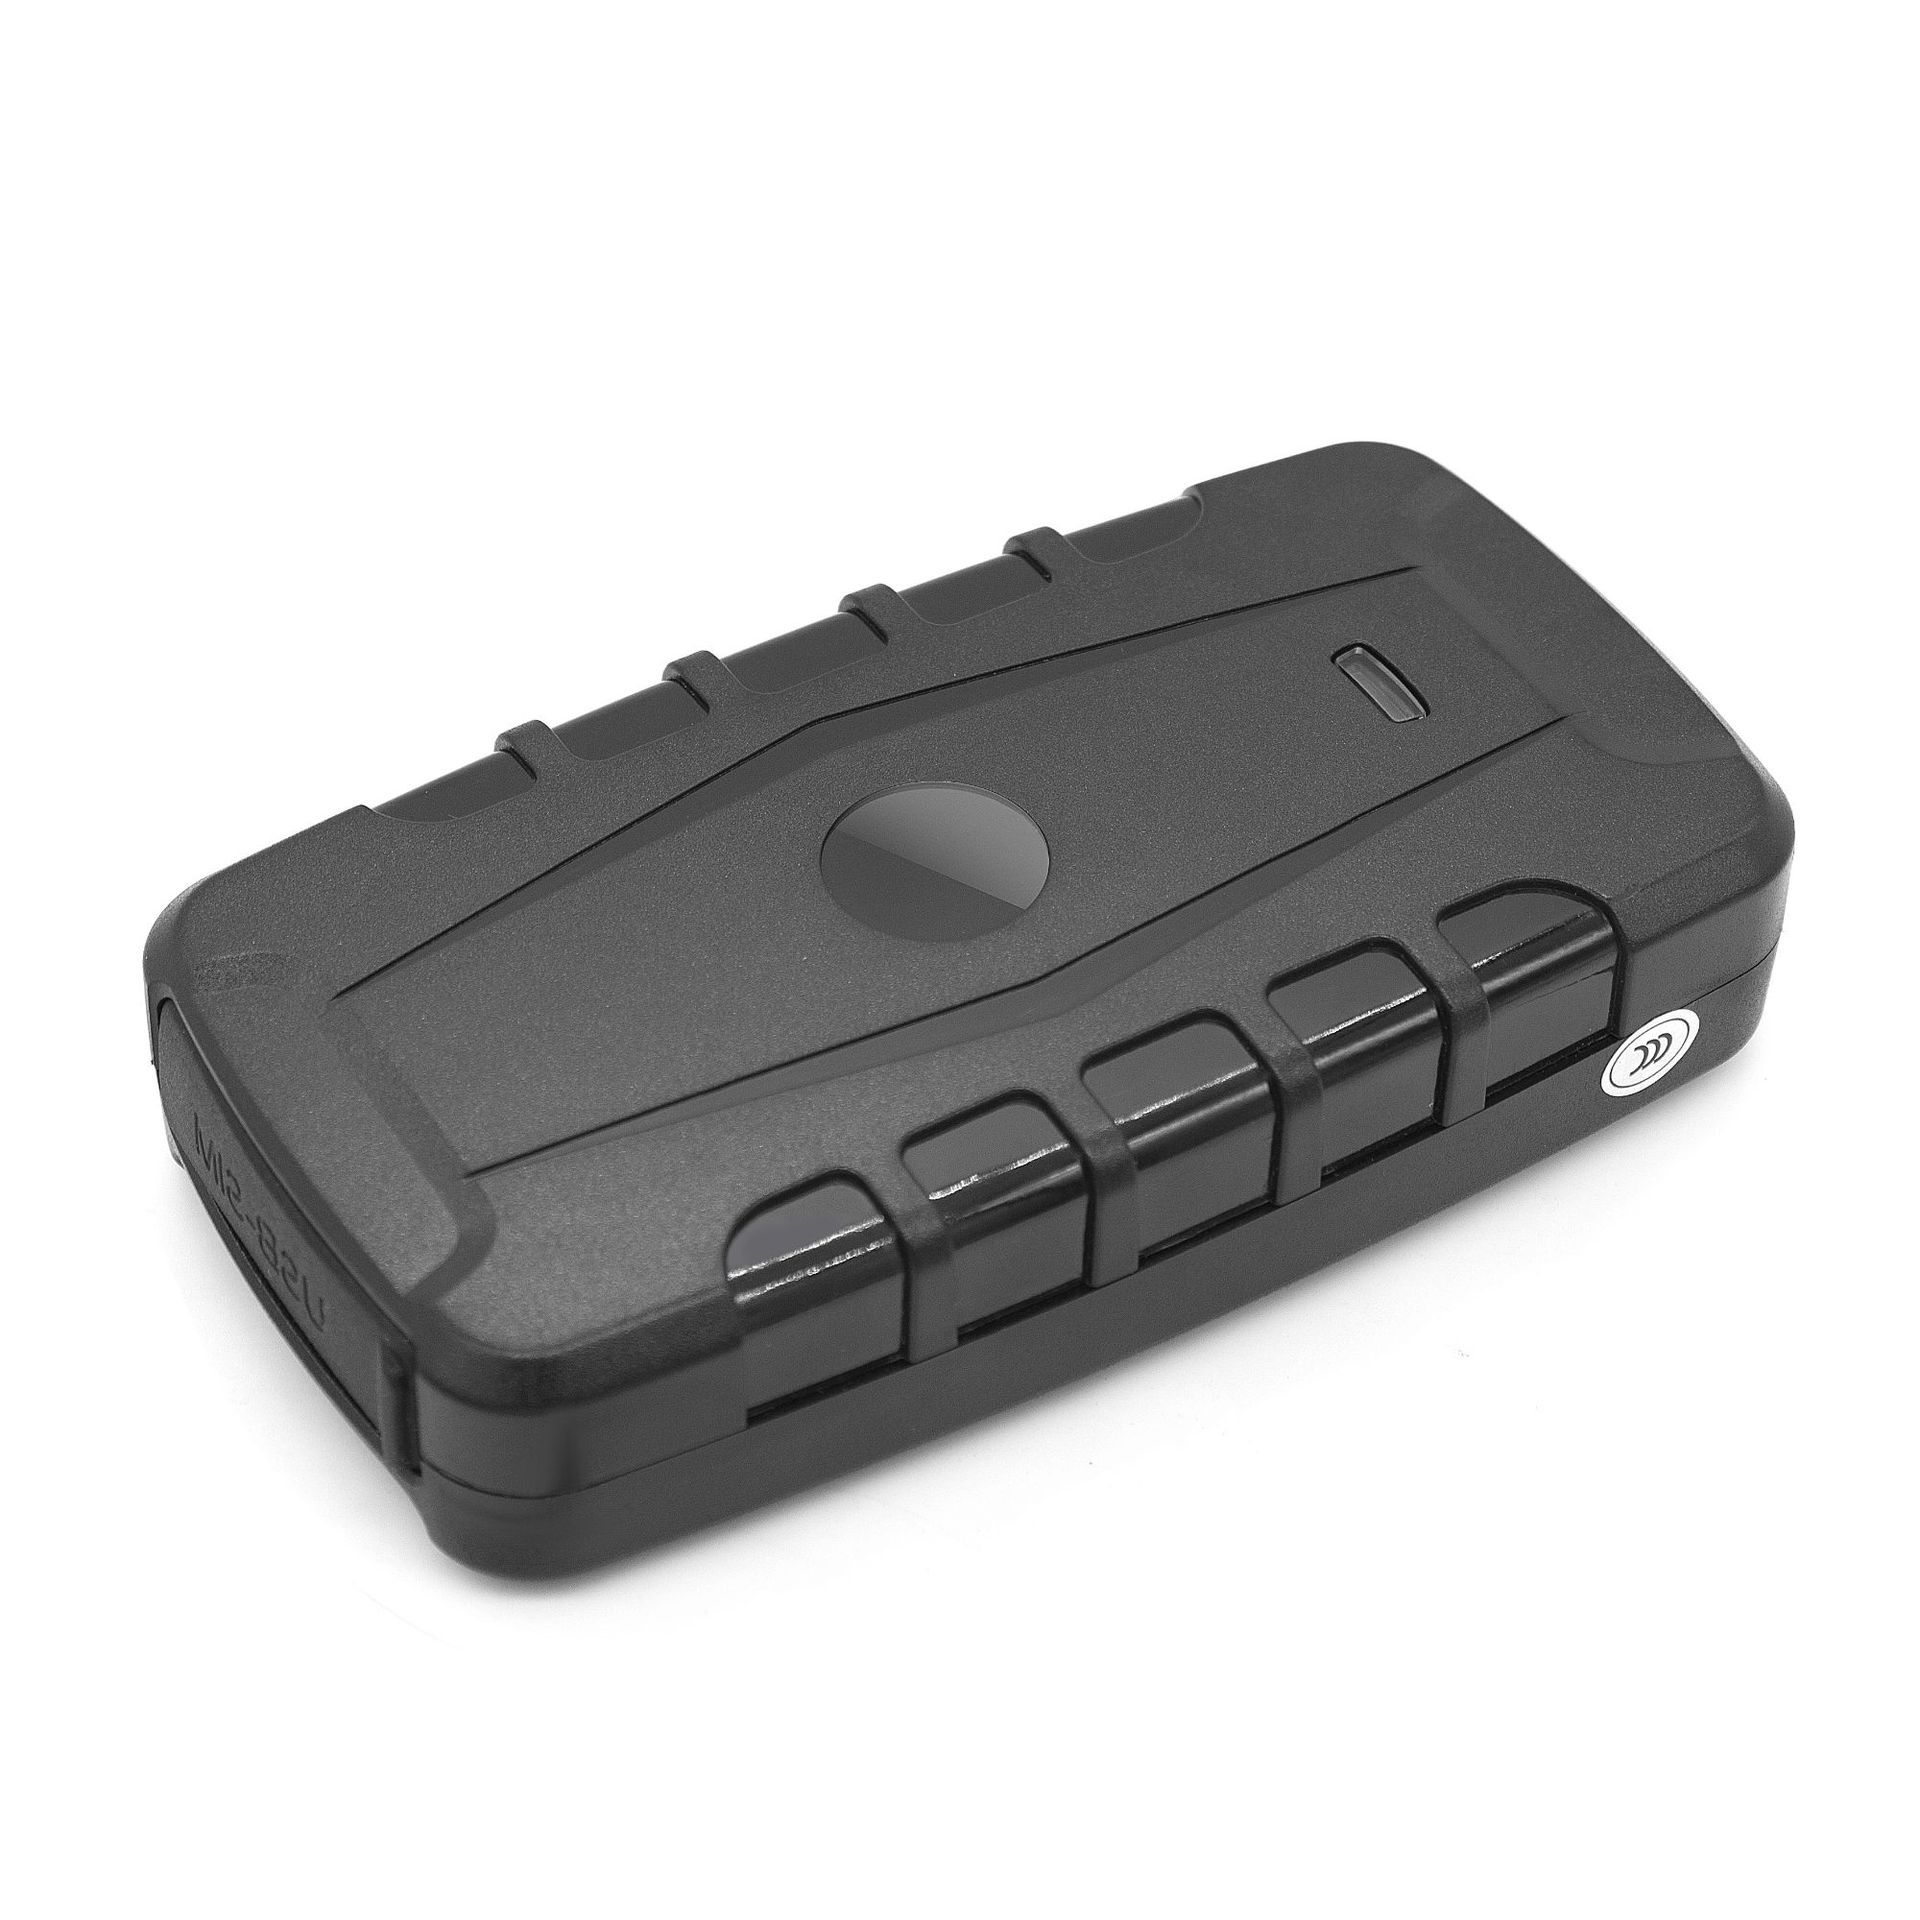 Portable long battery life 4G GPS tracker with strong magnet 